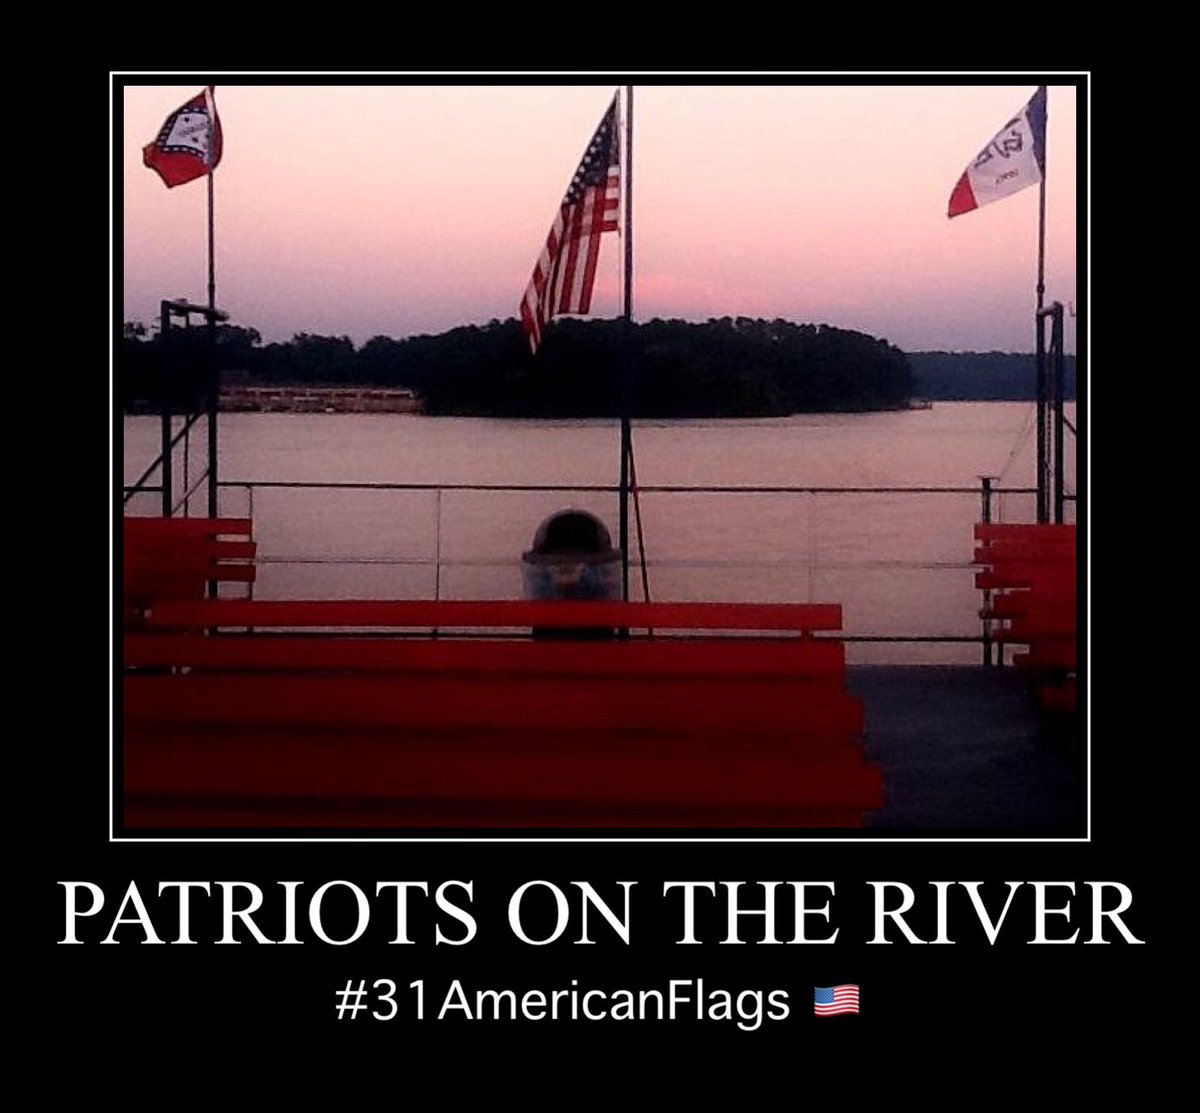 Sunset on the river…
Our flag, long may She wave! 🇺🇸
#31americanflags #patriotism #ProudAmerican #kenthrives #thrivepatriot #GodBlessAmerica